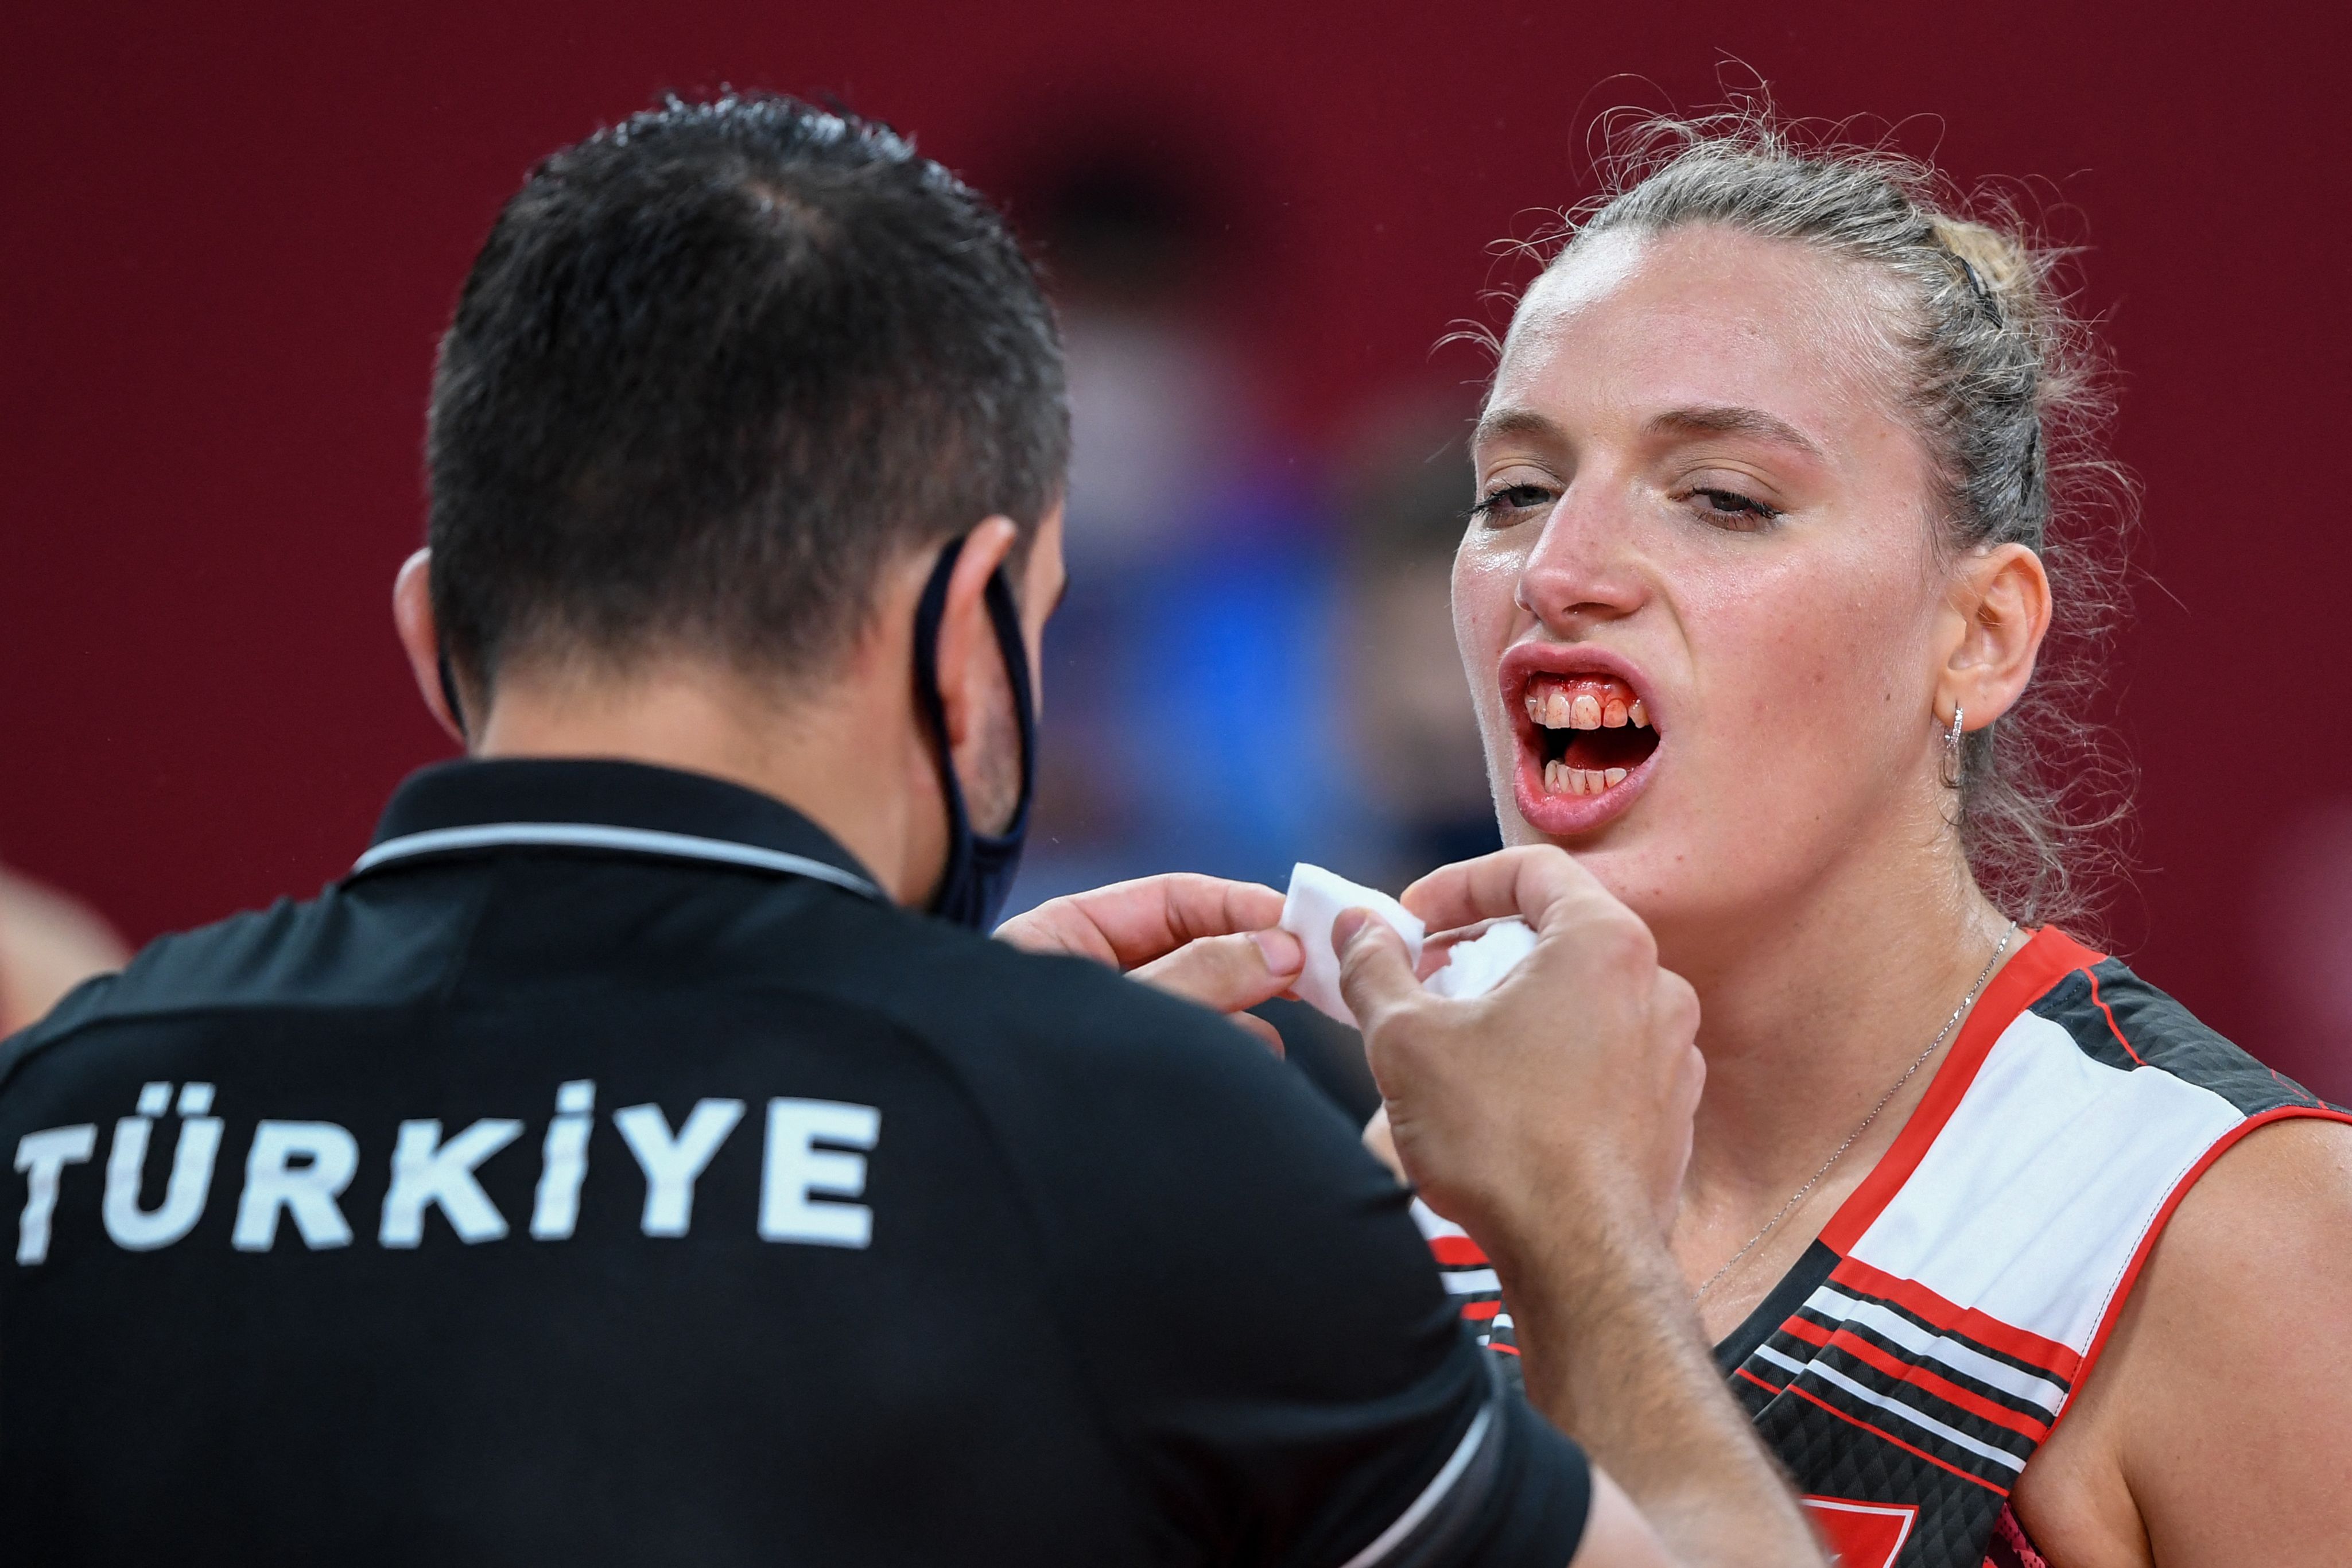 Turkish Women S Volleyball Players Power Through After An Ugly Head To Head Collision The